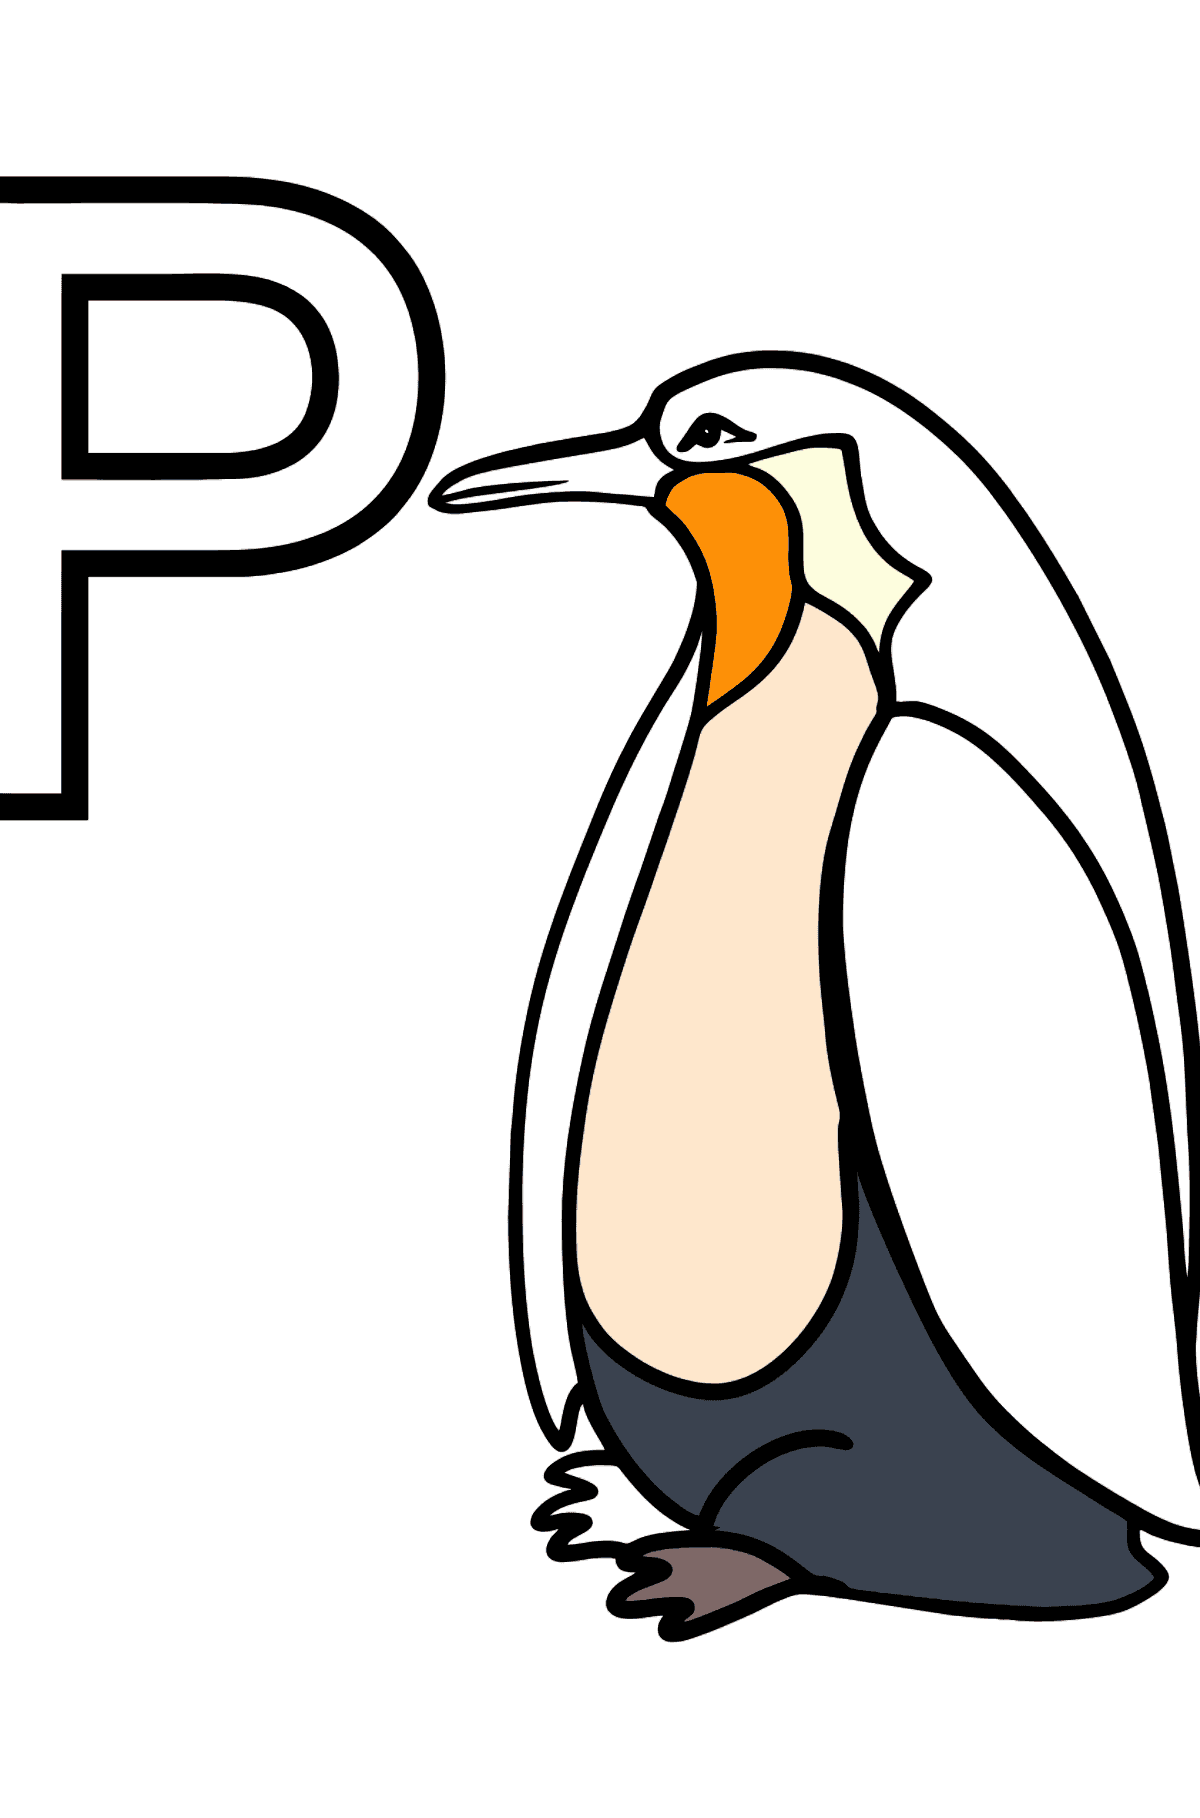 English Letter P coloring pages - PENGUIN - Coloring Pages for Kids